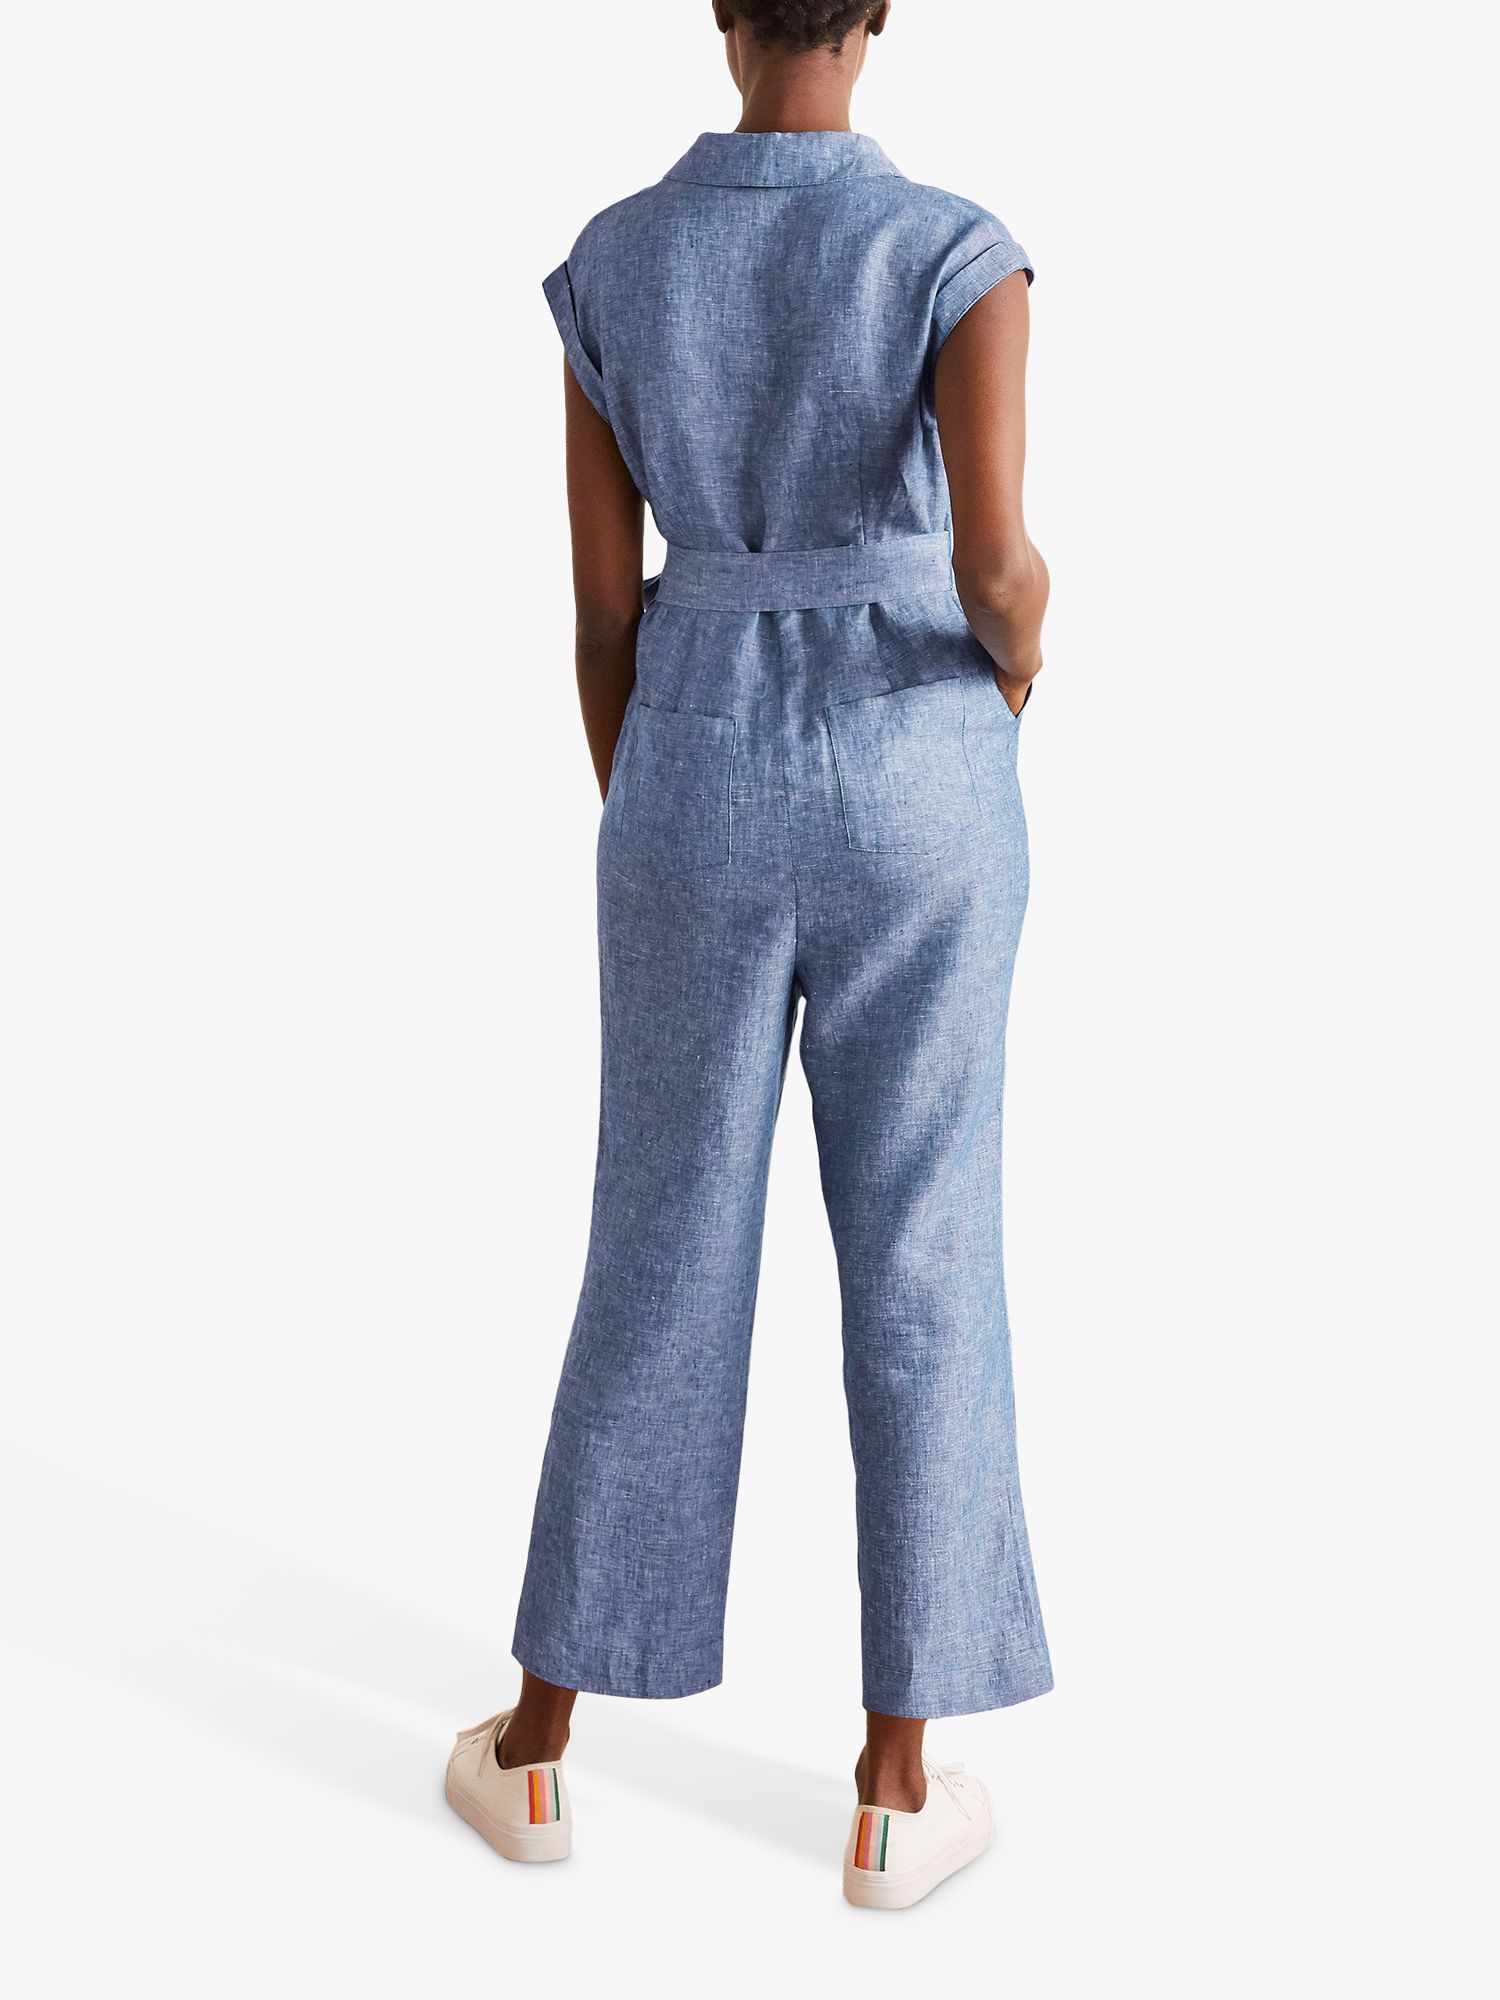 Boden Catriona Linen Jumpsuit, Chambray